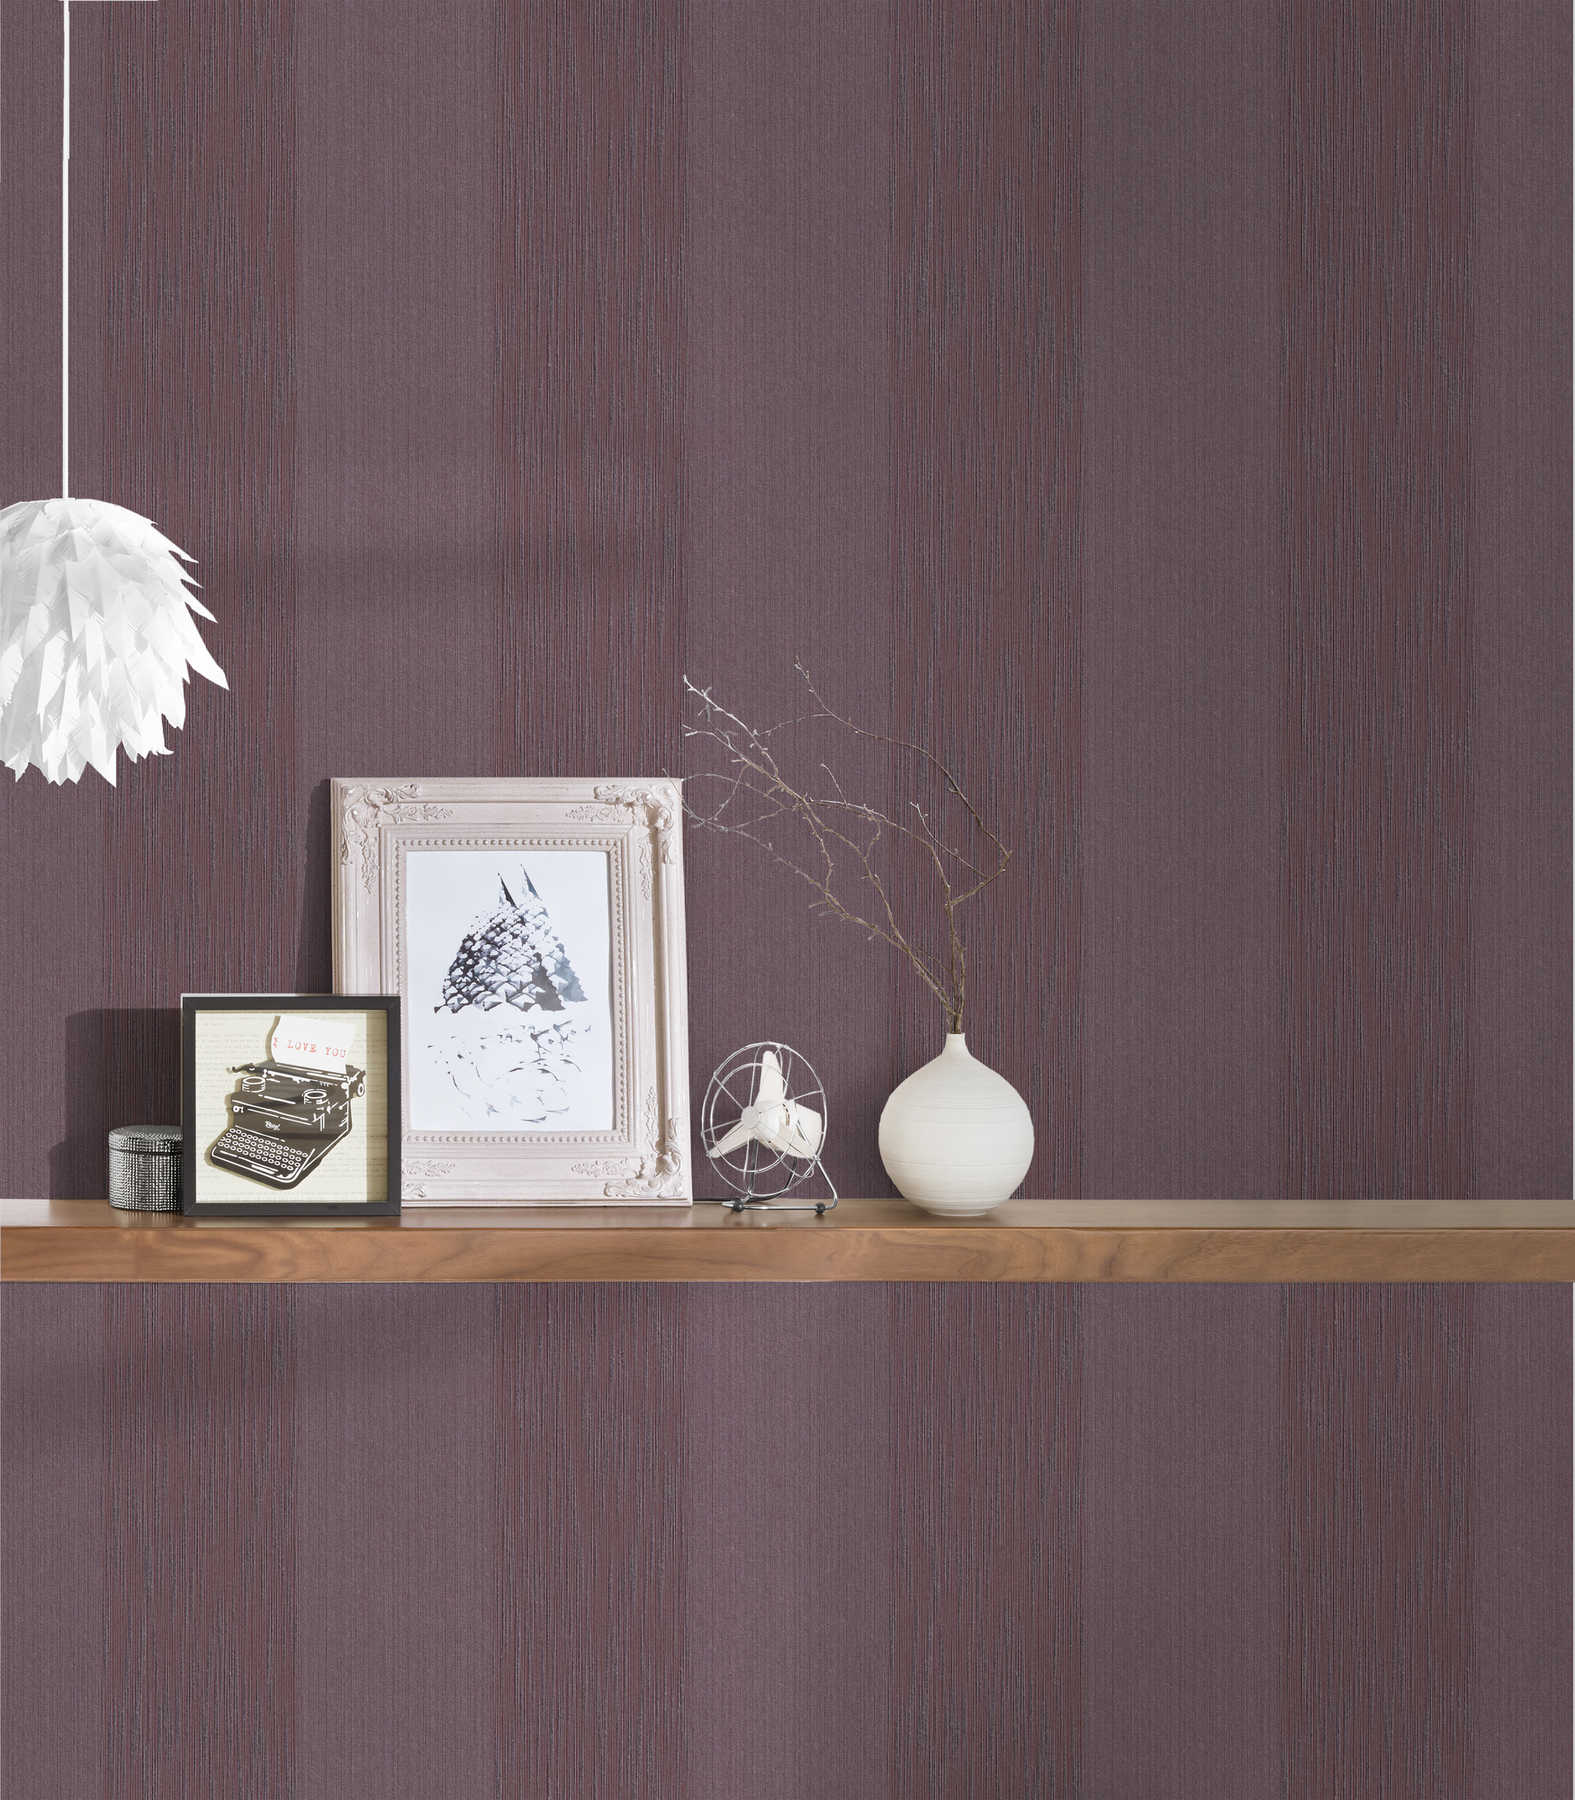             Baroque wallpaper with ornamental pattern & structure effect - purple
        